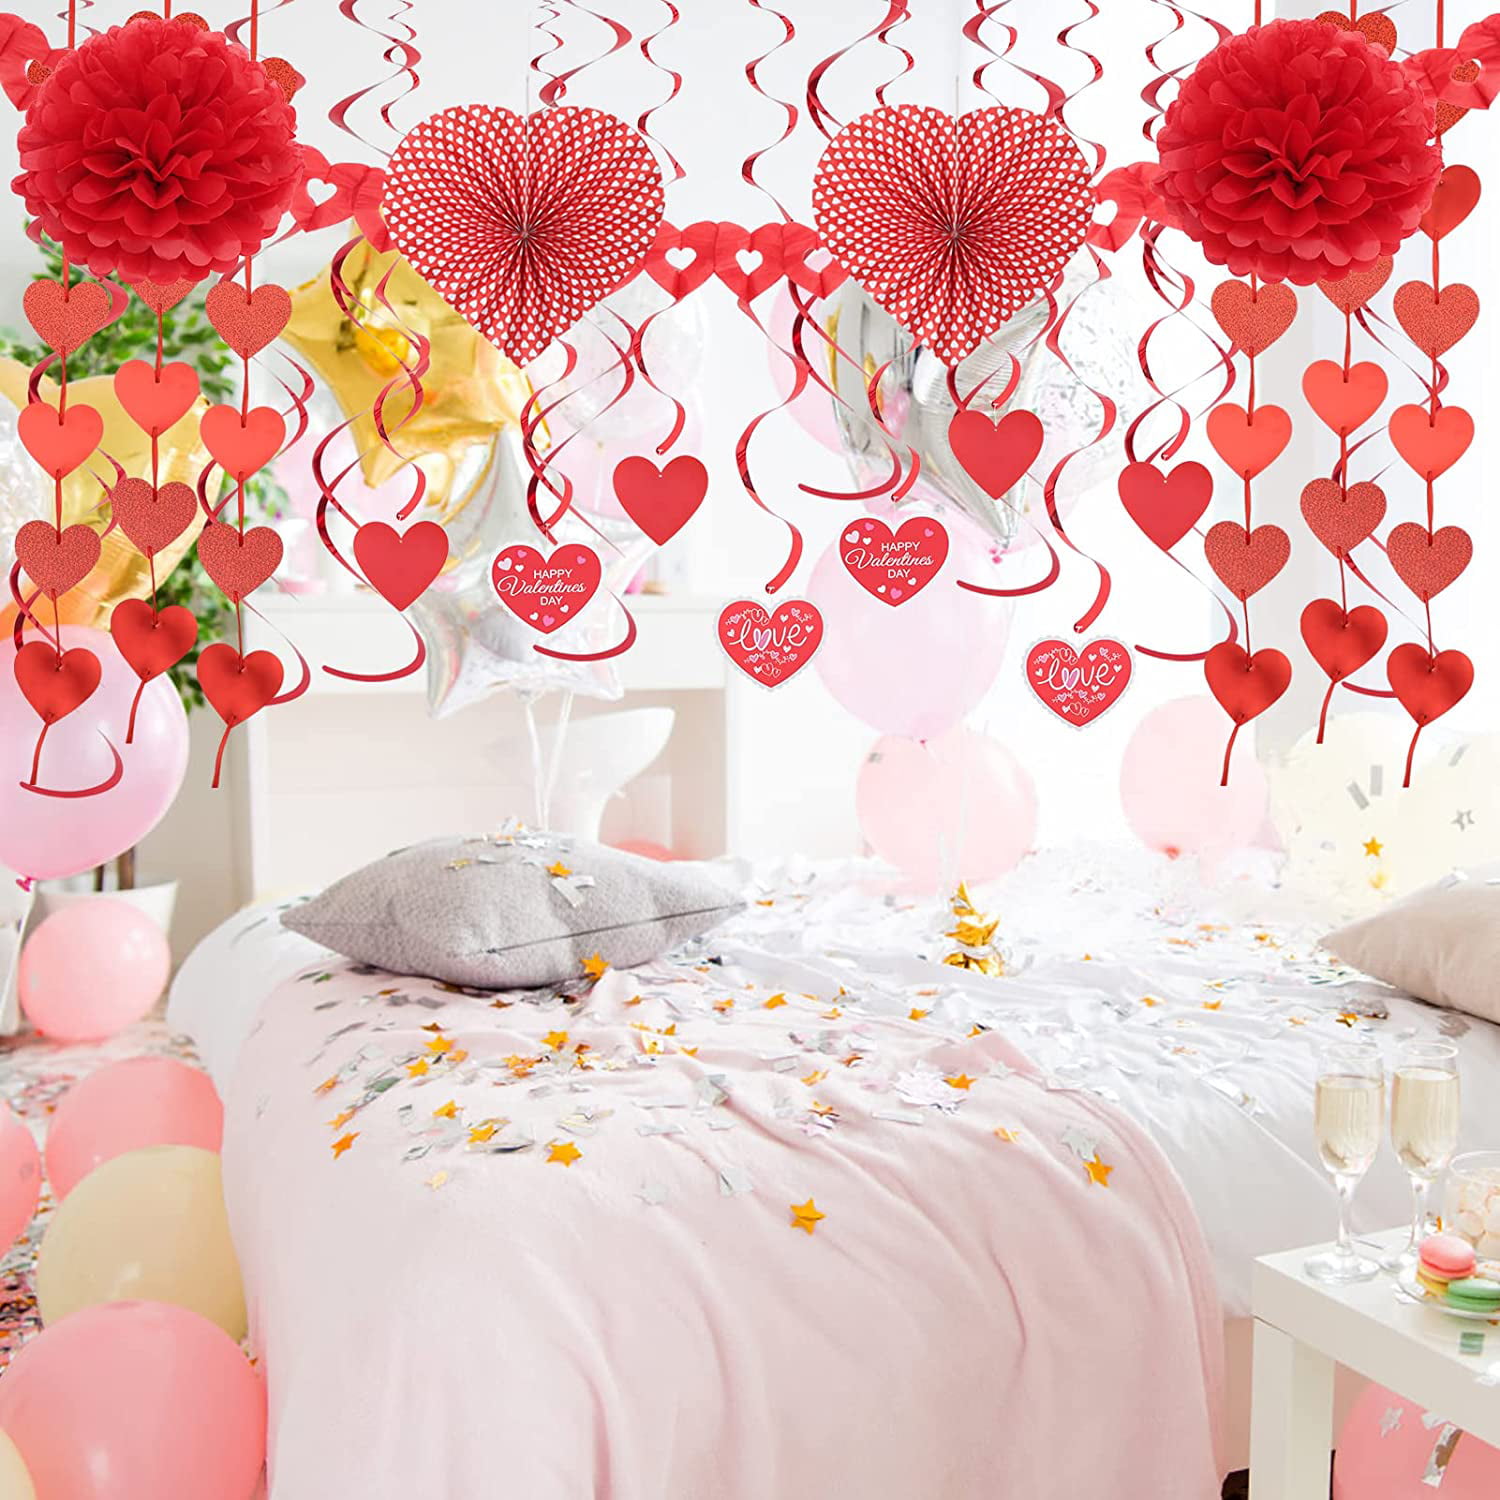 YUHAOTIN Unique Girlfriend Gifts Valentine's Day Decorations Bedroom Living  Room Desktop Decoration Standing Post Valentines Decor Things to Get Your